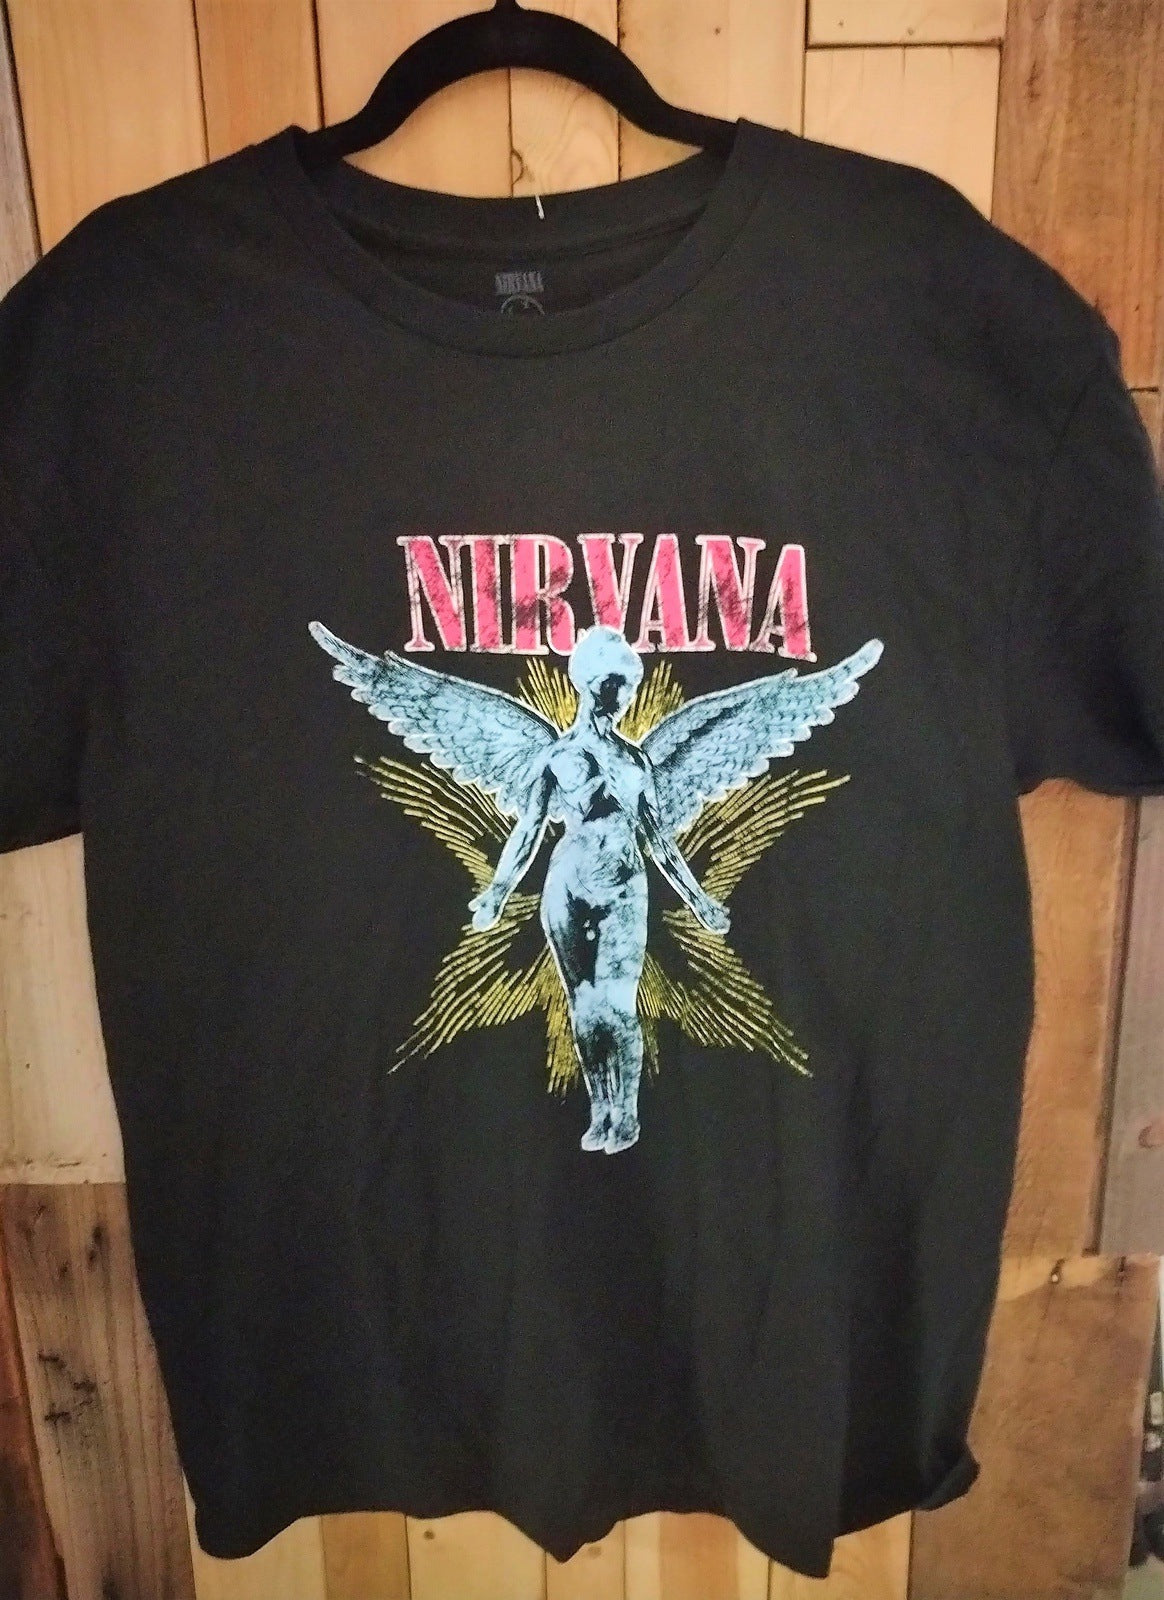 Nirvana Official Merchandise "In Utero" T Shirt Size Large